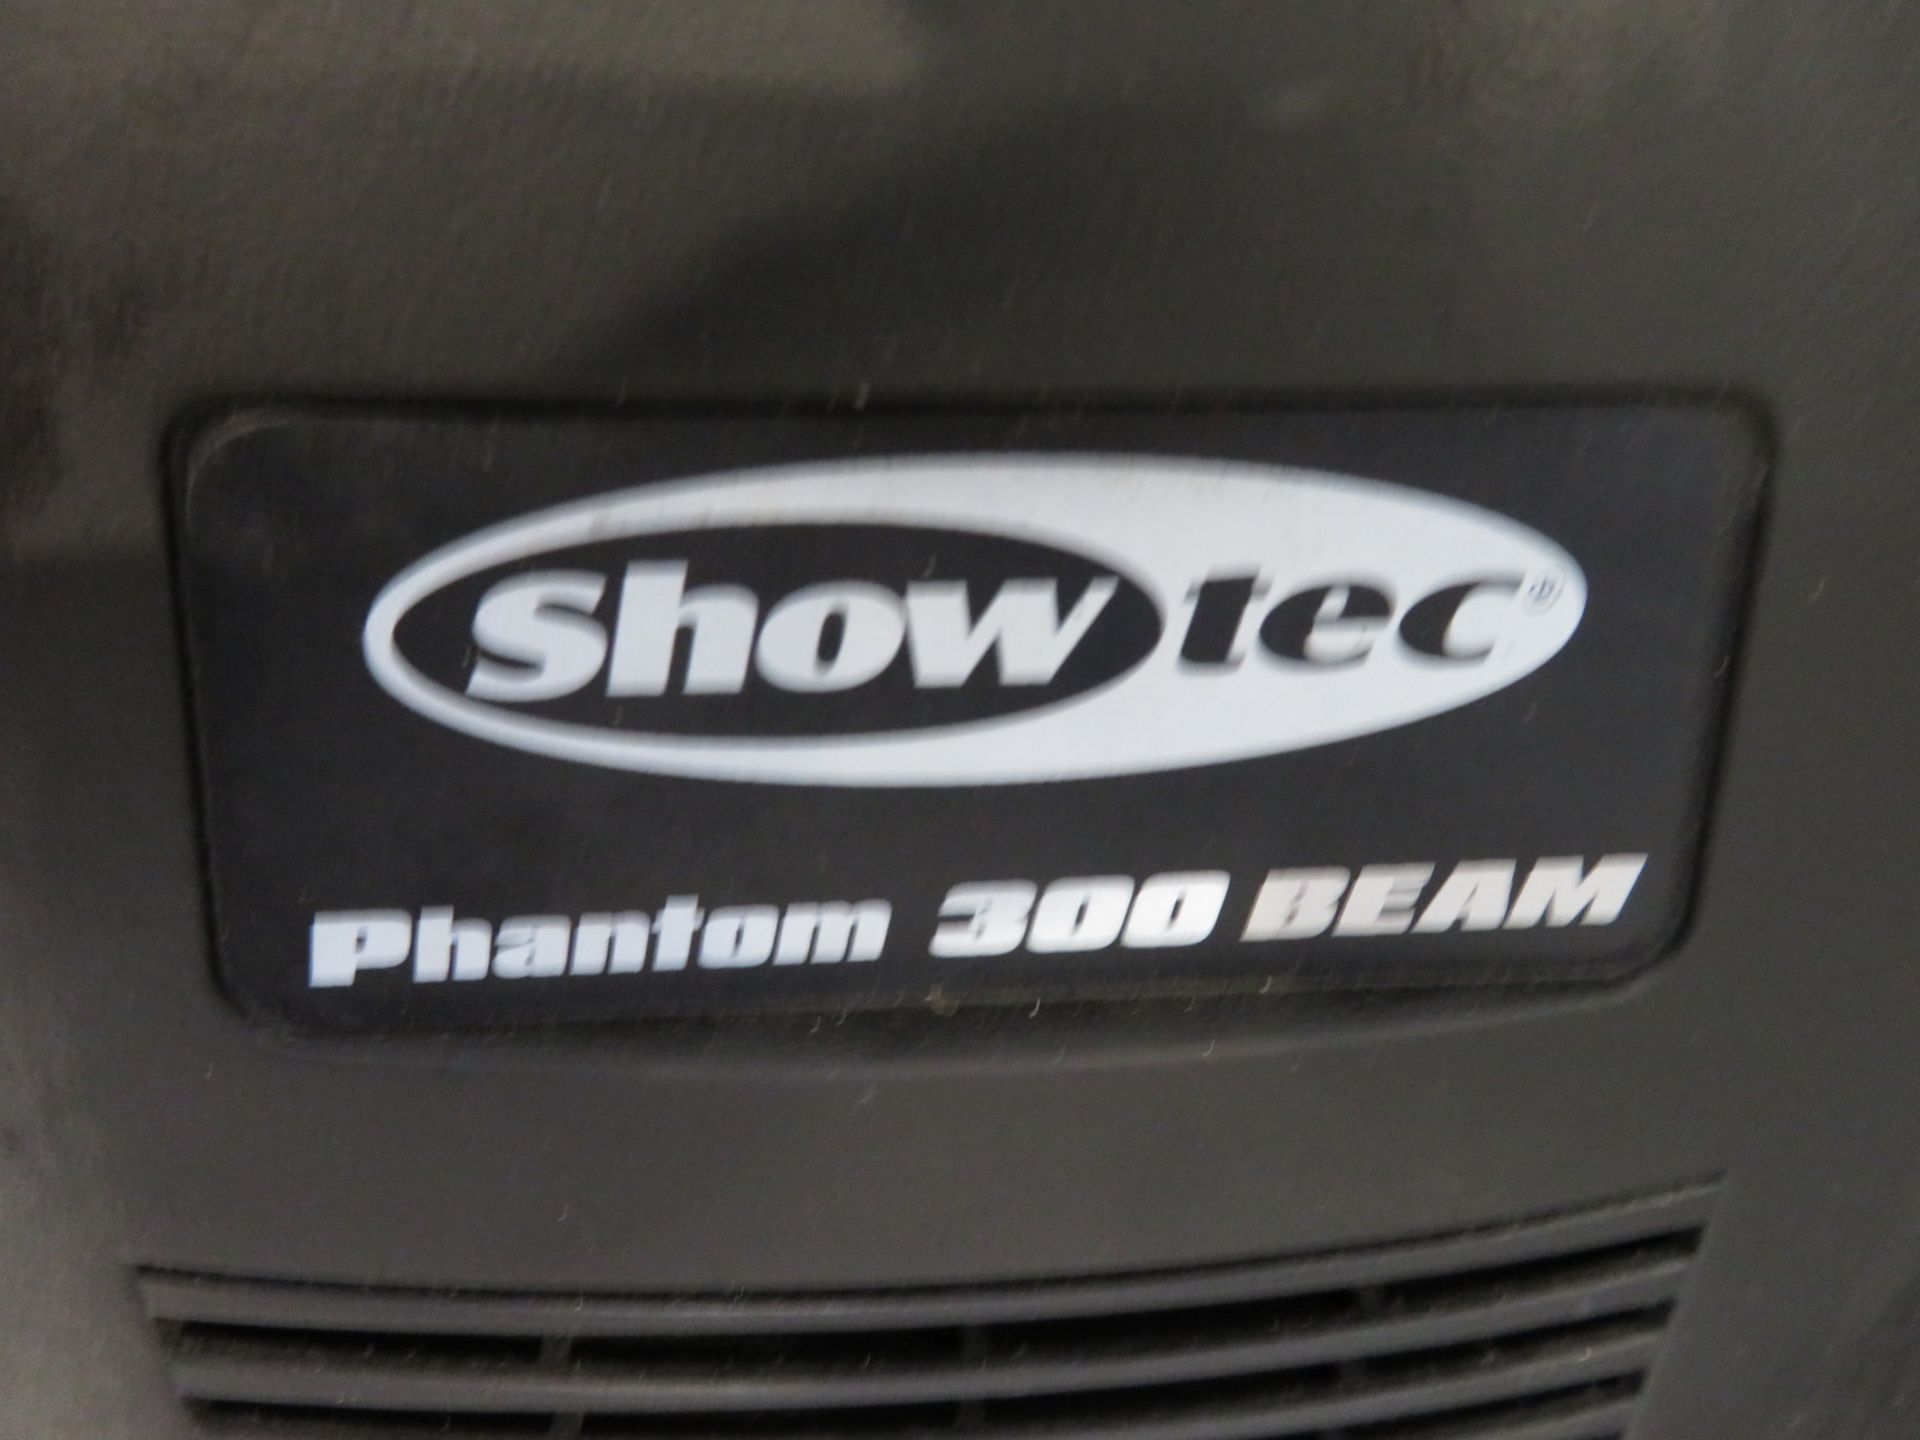 Pair of Showtec Phantom 300 Beams in flightcase. Includes hanging clamps and safety bonds. - Image 4 of 7